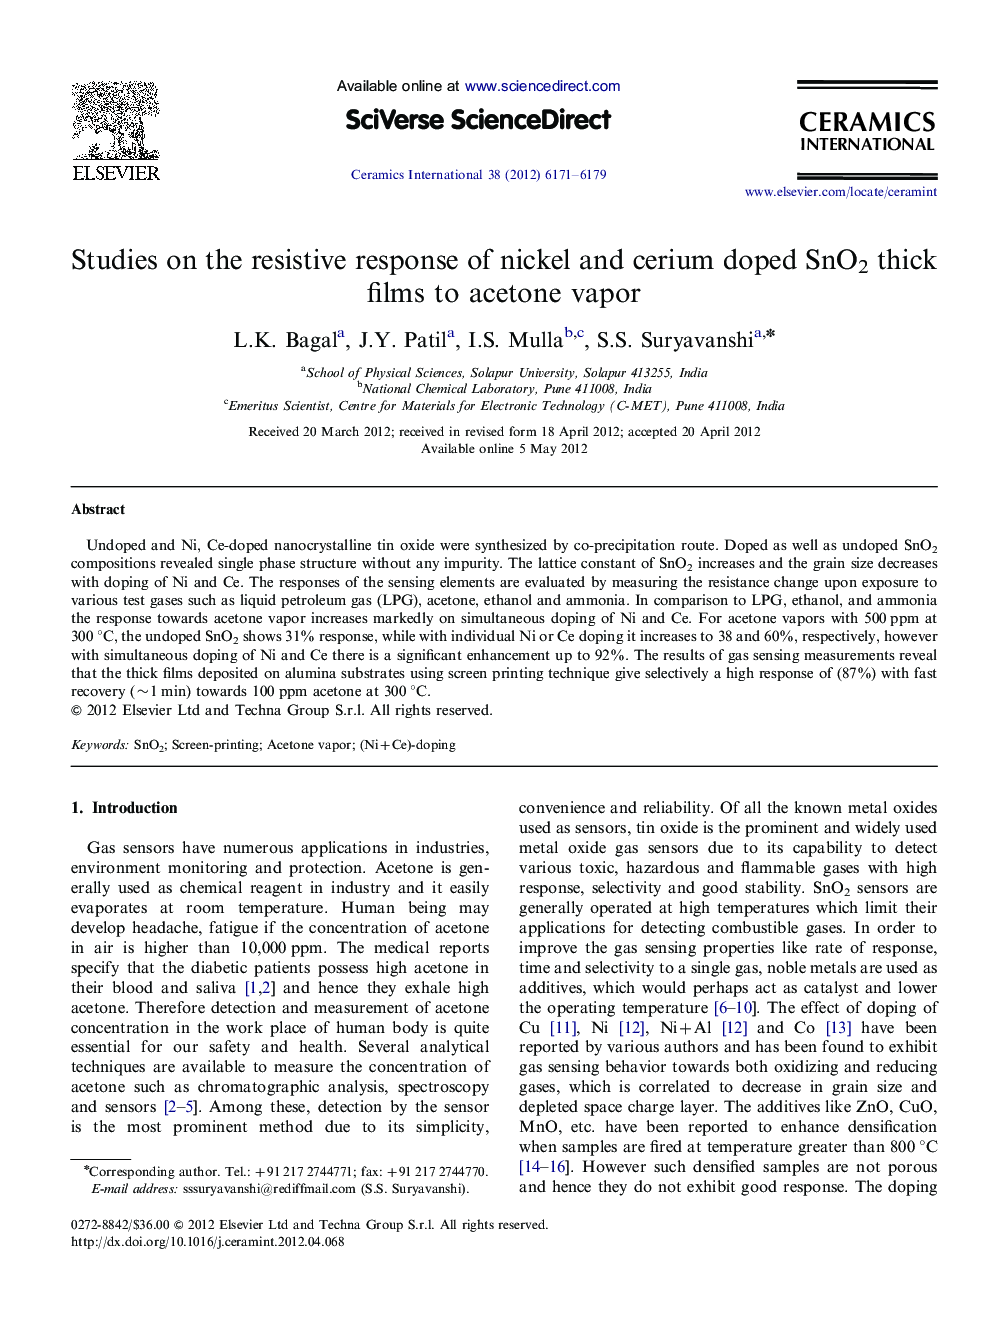 Studies on the resistive response of nickel and cerium doped SnO2 thick films to acetone vapor